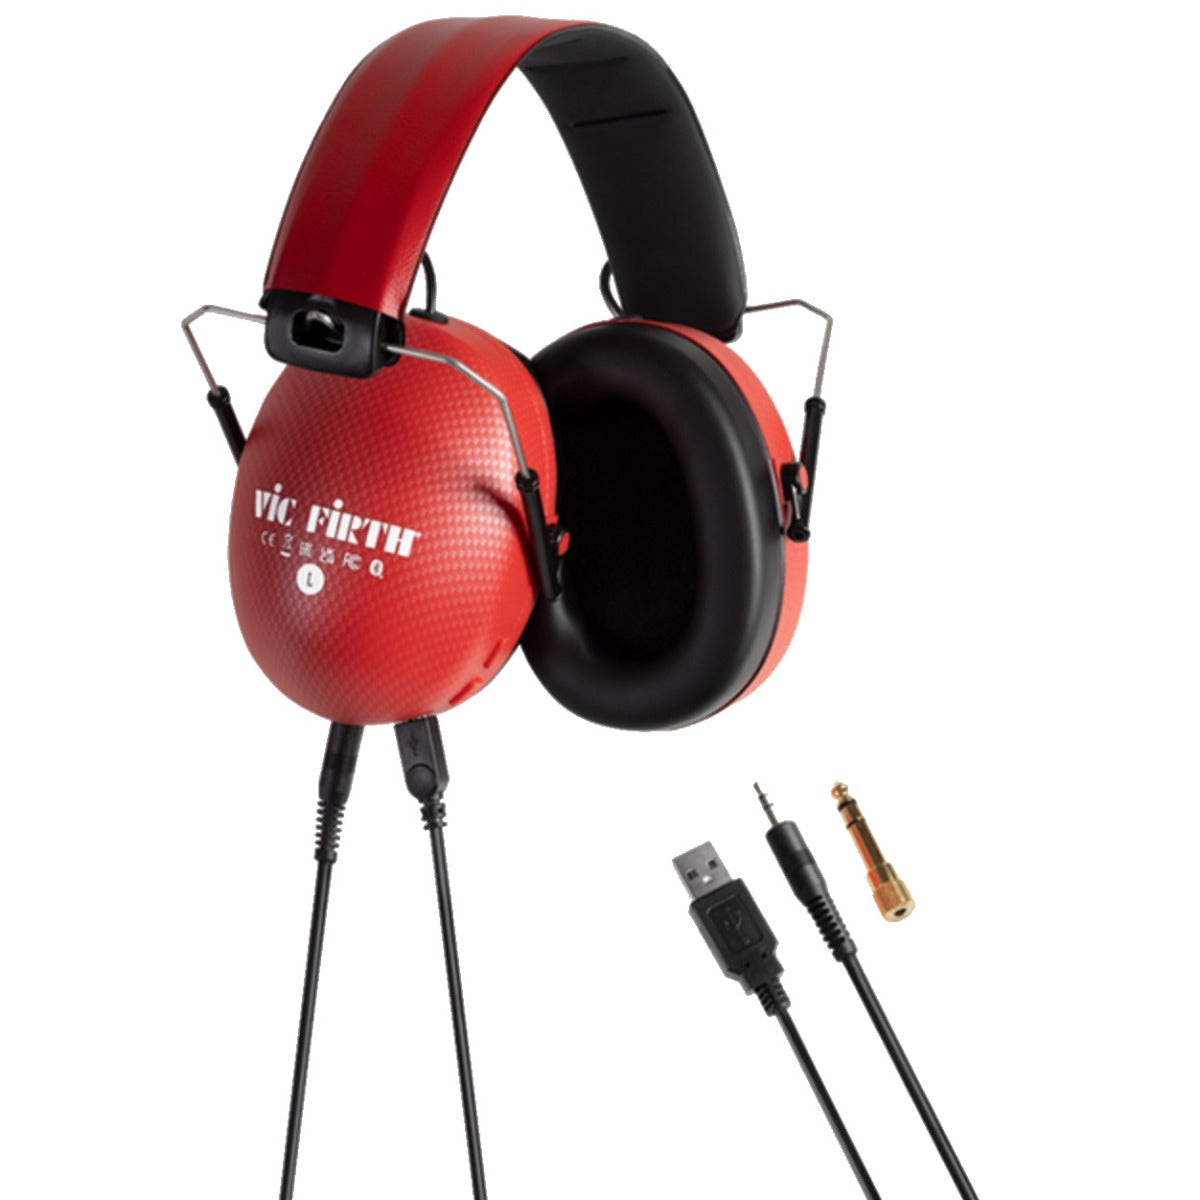 Vic Firth Bluetooth Isolation Headphones view 3